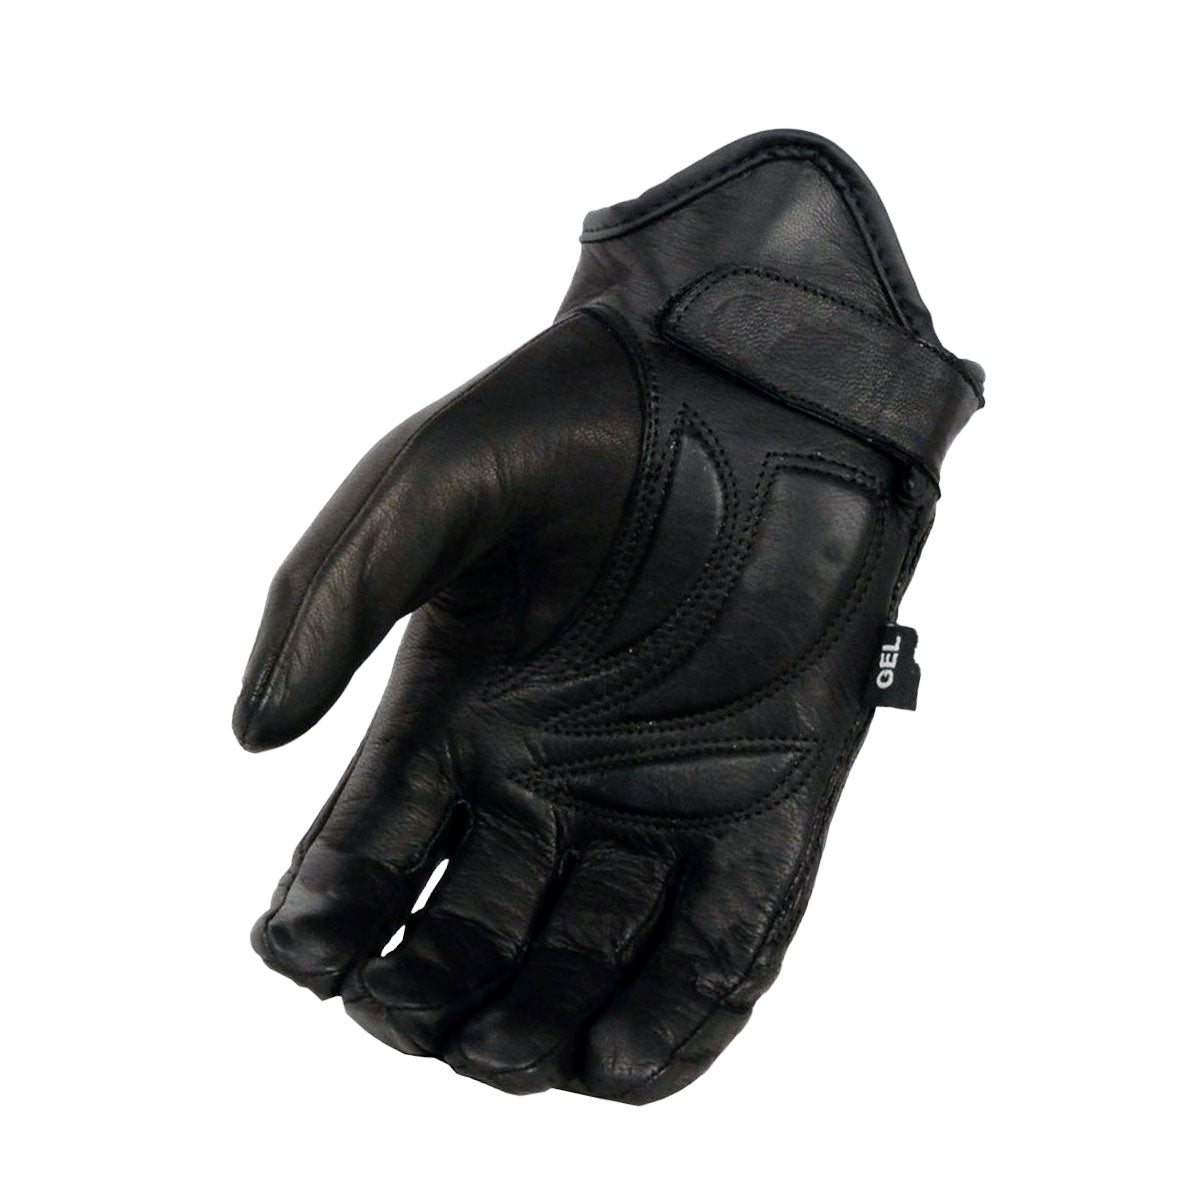 Milwaukee Leather MG7571 Men's Black ‘Col-Tec’ Leather ‘Reflective Skull’ Motorcycle Hand Gloves W/ Gel Padded Palm